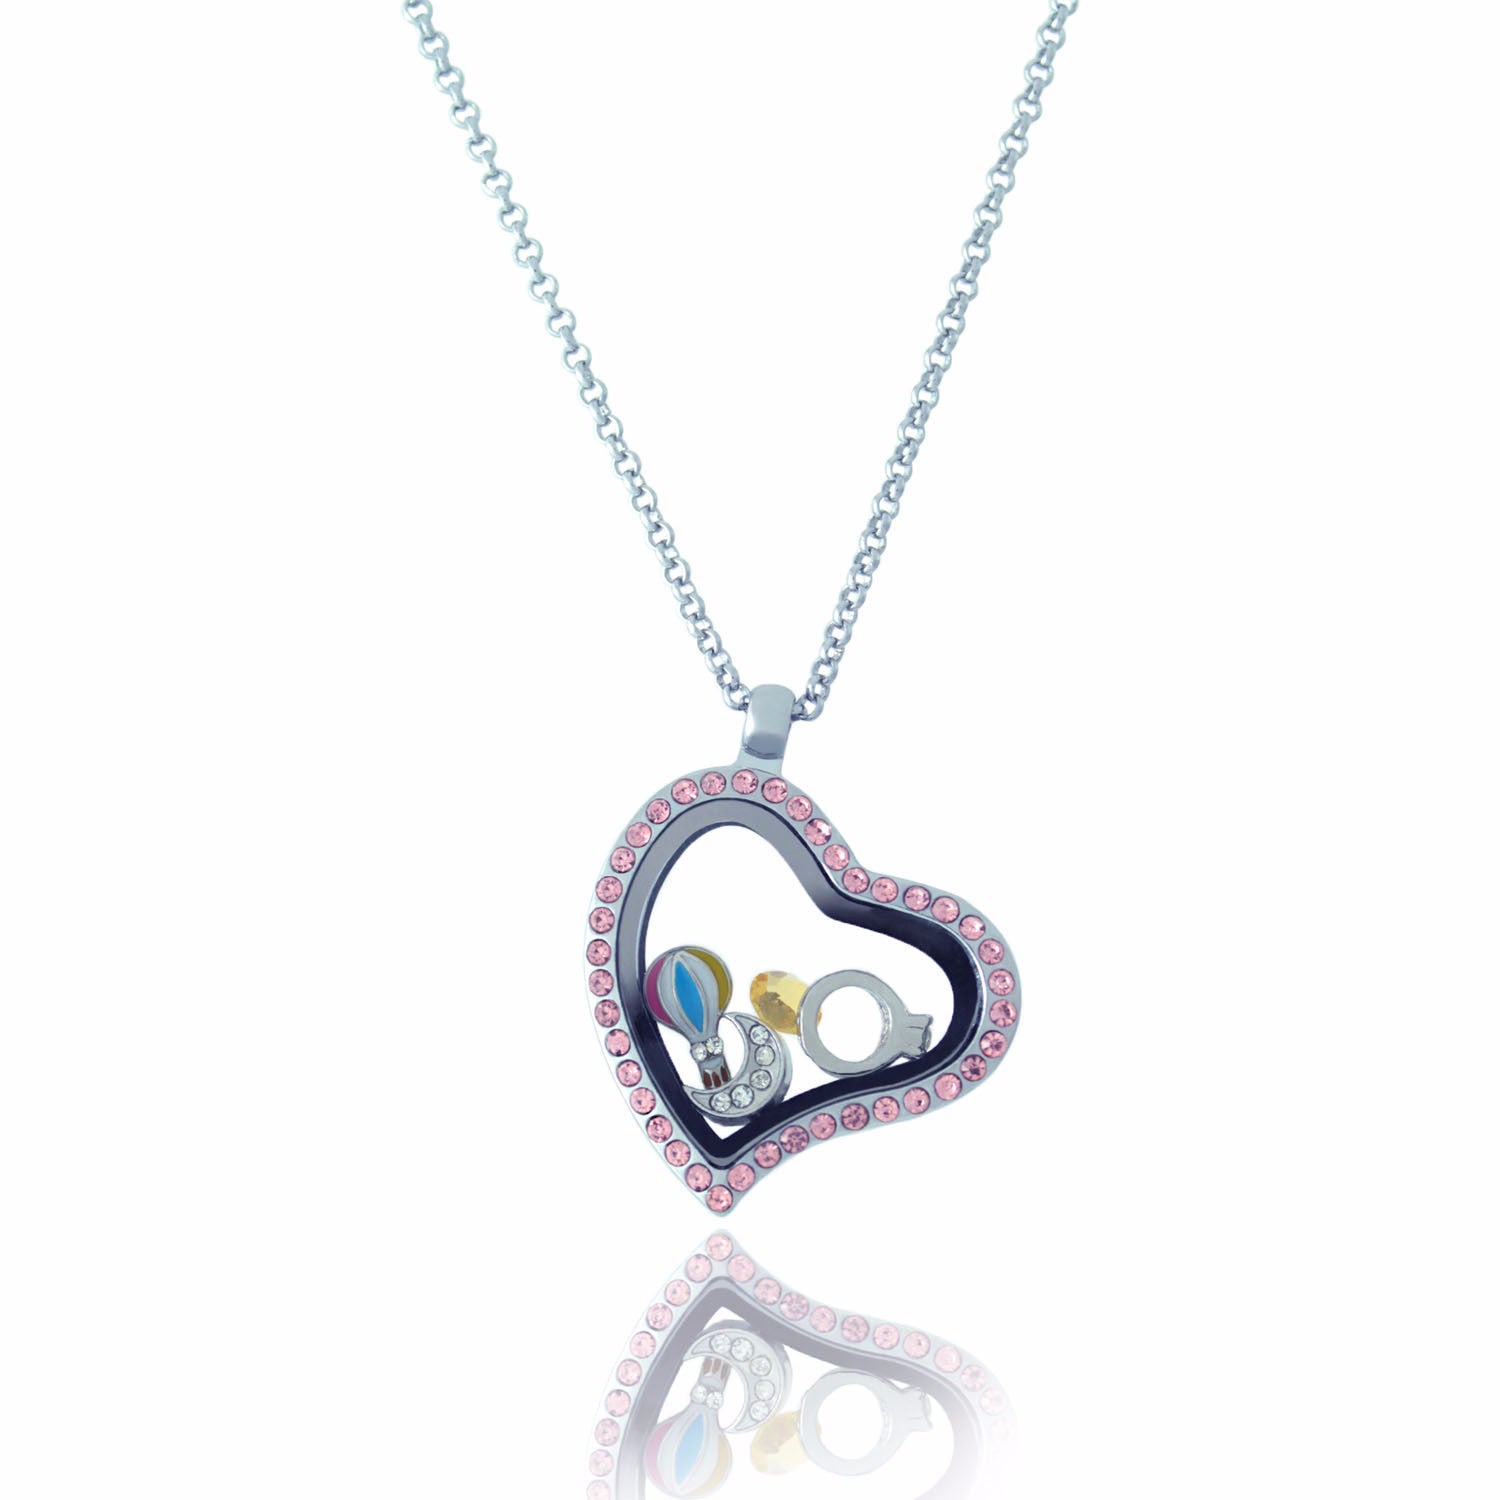 Floating Locket Necklace with Matching Chain and Choice of 6 Charms (Pink Rhinestone Heart)